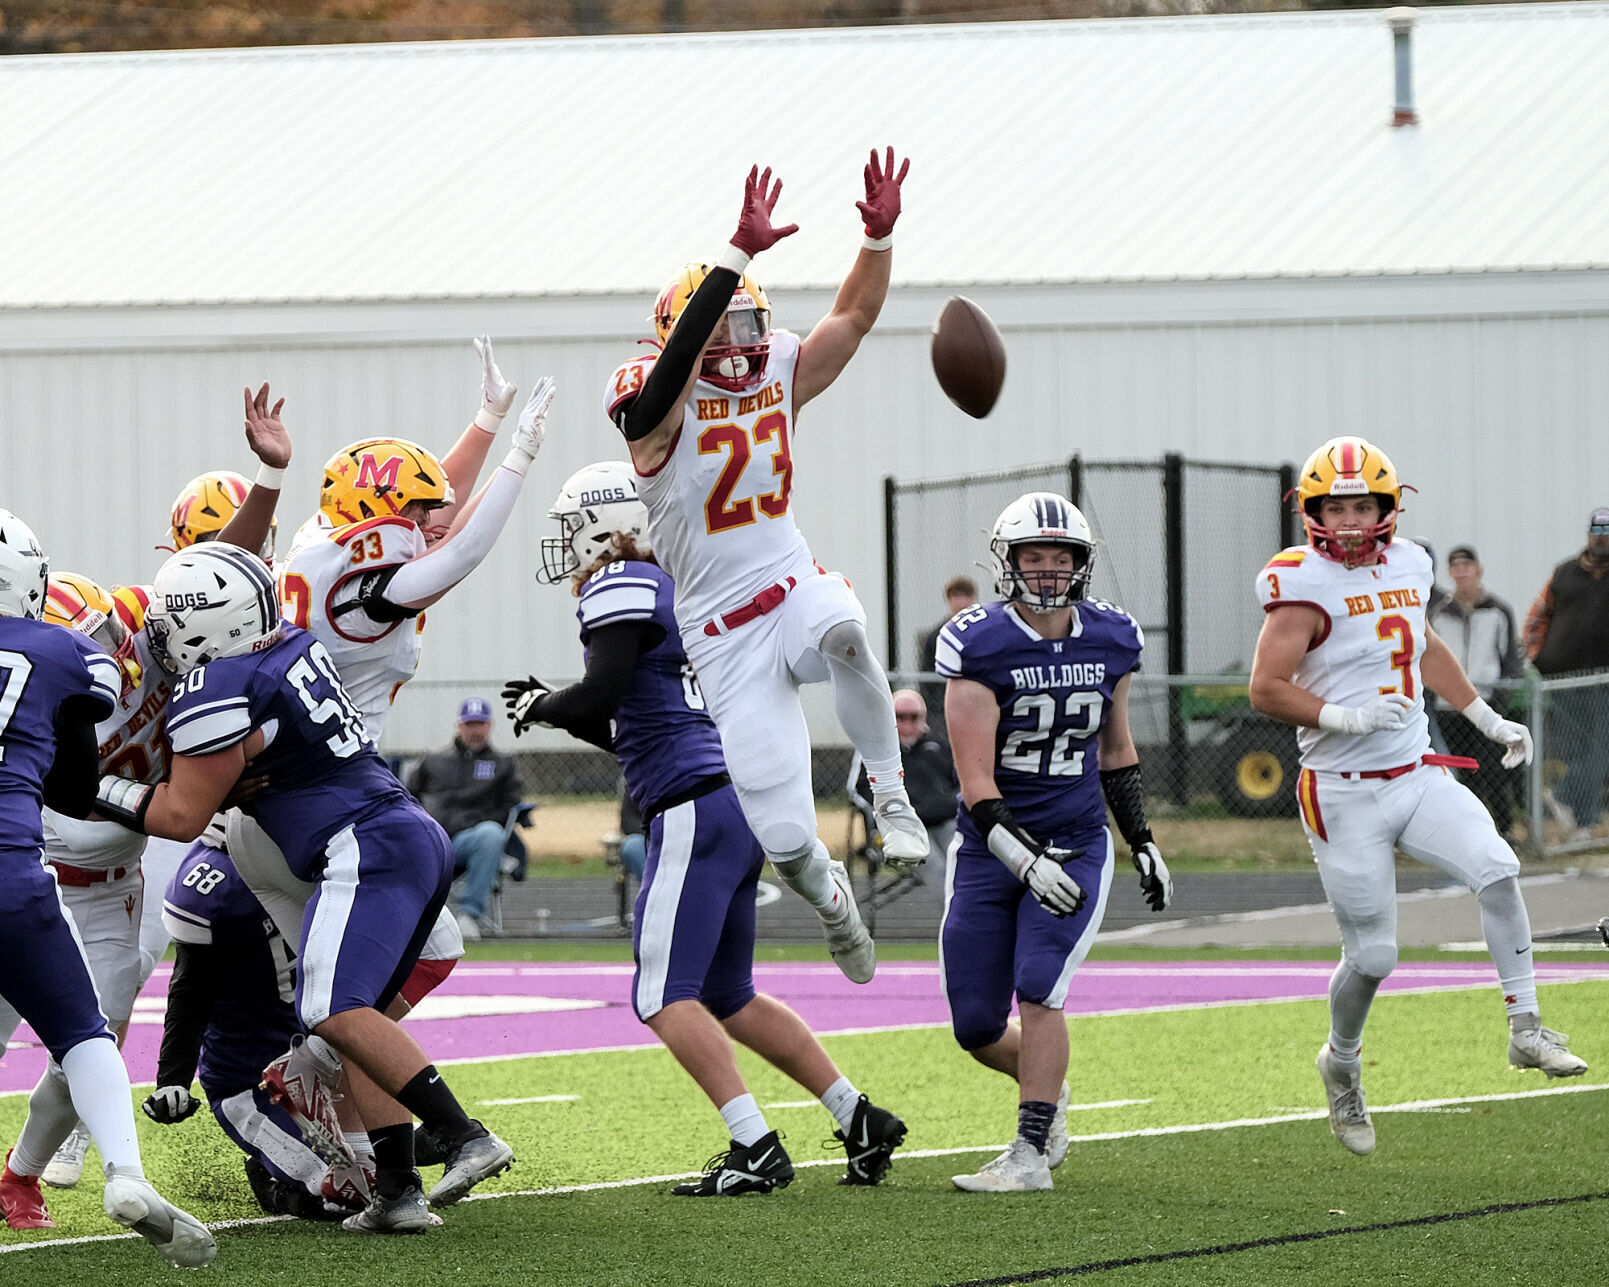 Murphysboro Makes School History with Epic Game-Winning Touchdown